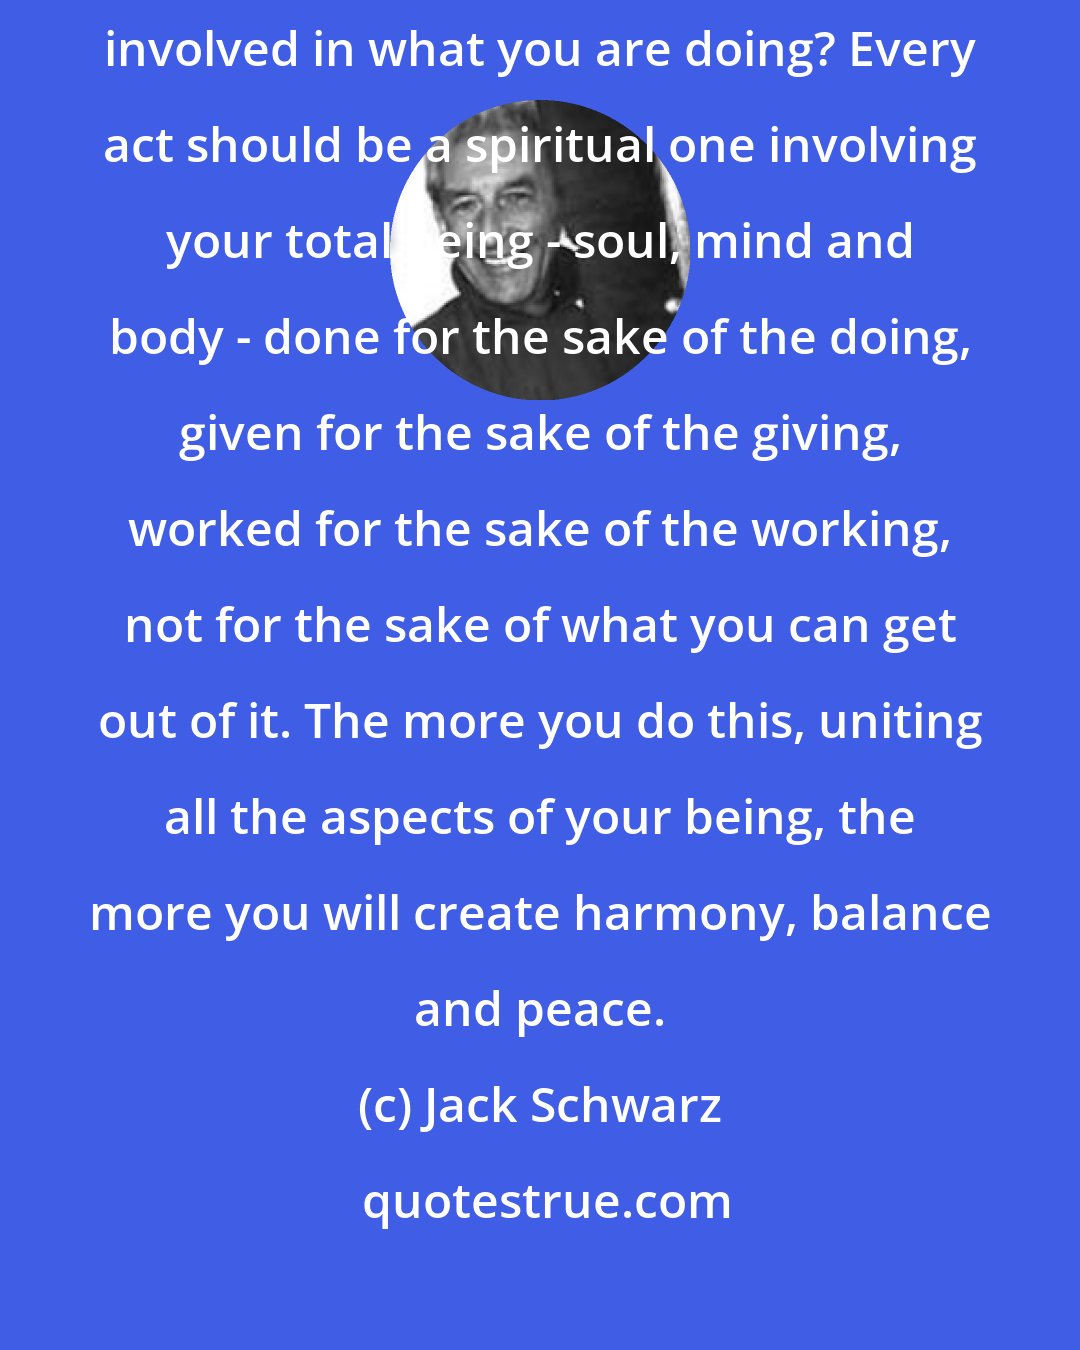 Jack Schwarz: You are meant to think before you speak. How many times is your heart involved in what you are doing? Every act should be a spiritual one involving your total being - soul, mind and body - done for the sake of the doing, given for the sake of the giving, worked for the sake of the working, not for the sake of what you can get out of it. The more you do this, uniting all the aspects of your being, the more you will create harmony, balance and peace.